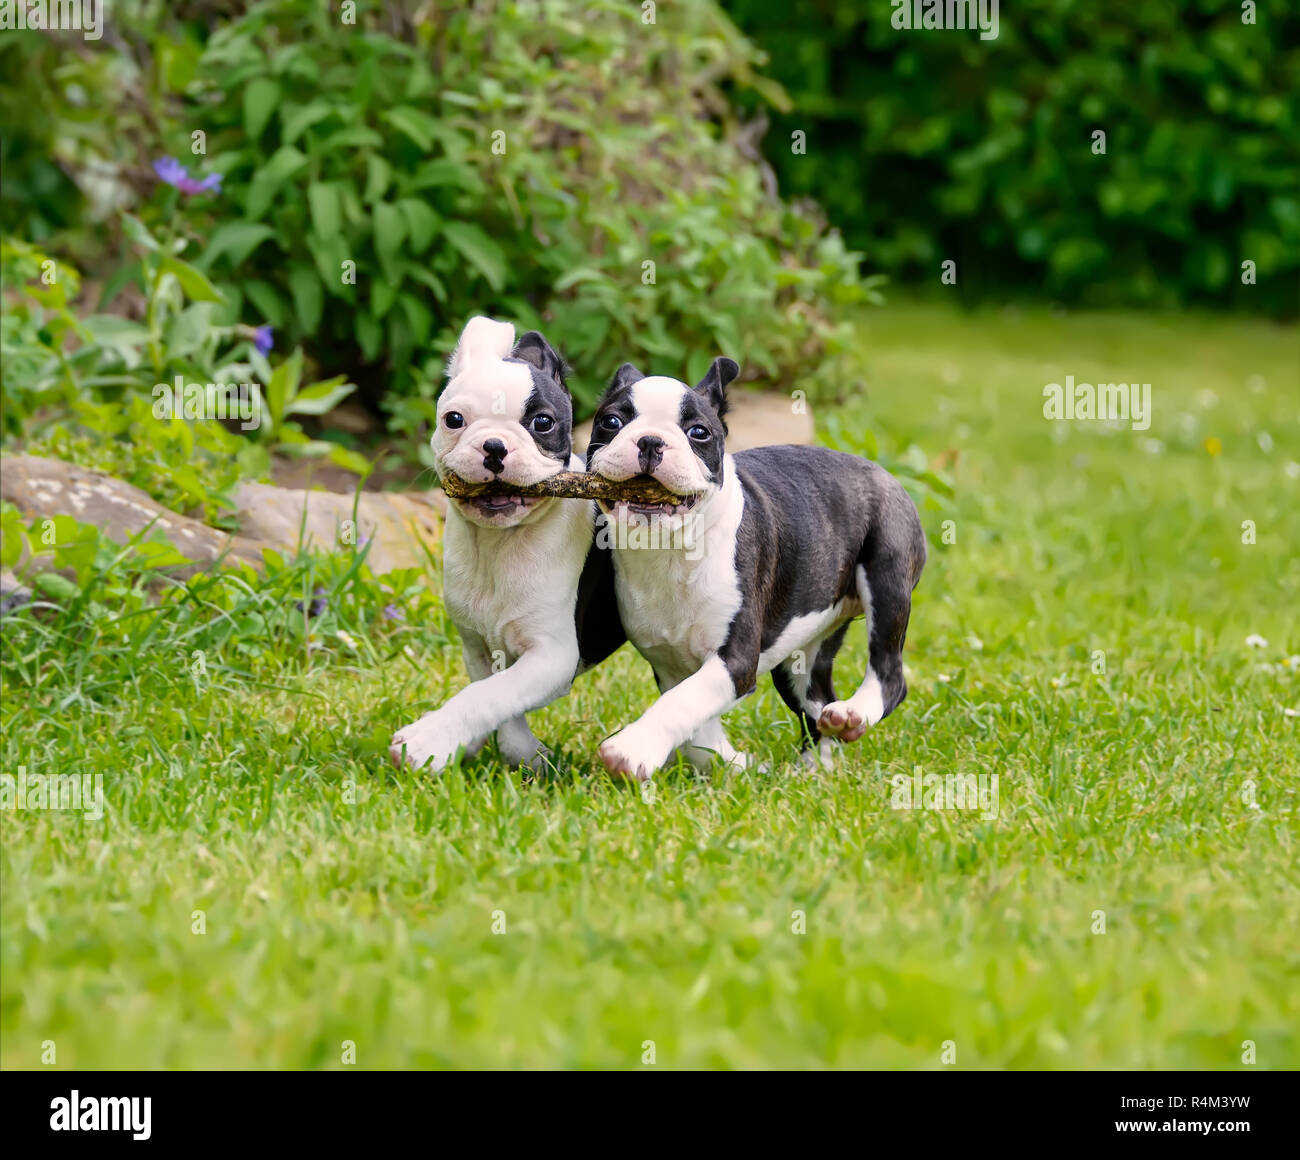 Two young Boston Terrier dogs, puppies black with white markings, running side by side and carrying a stick together Stock Photo